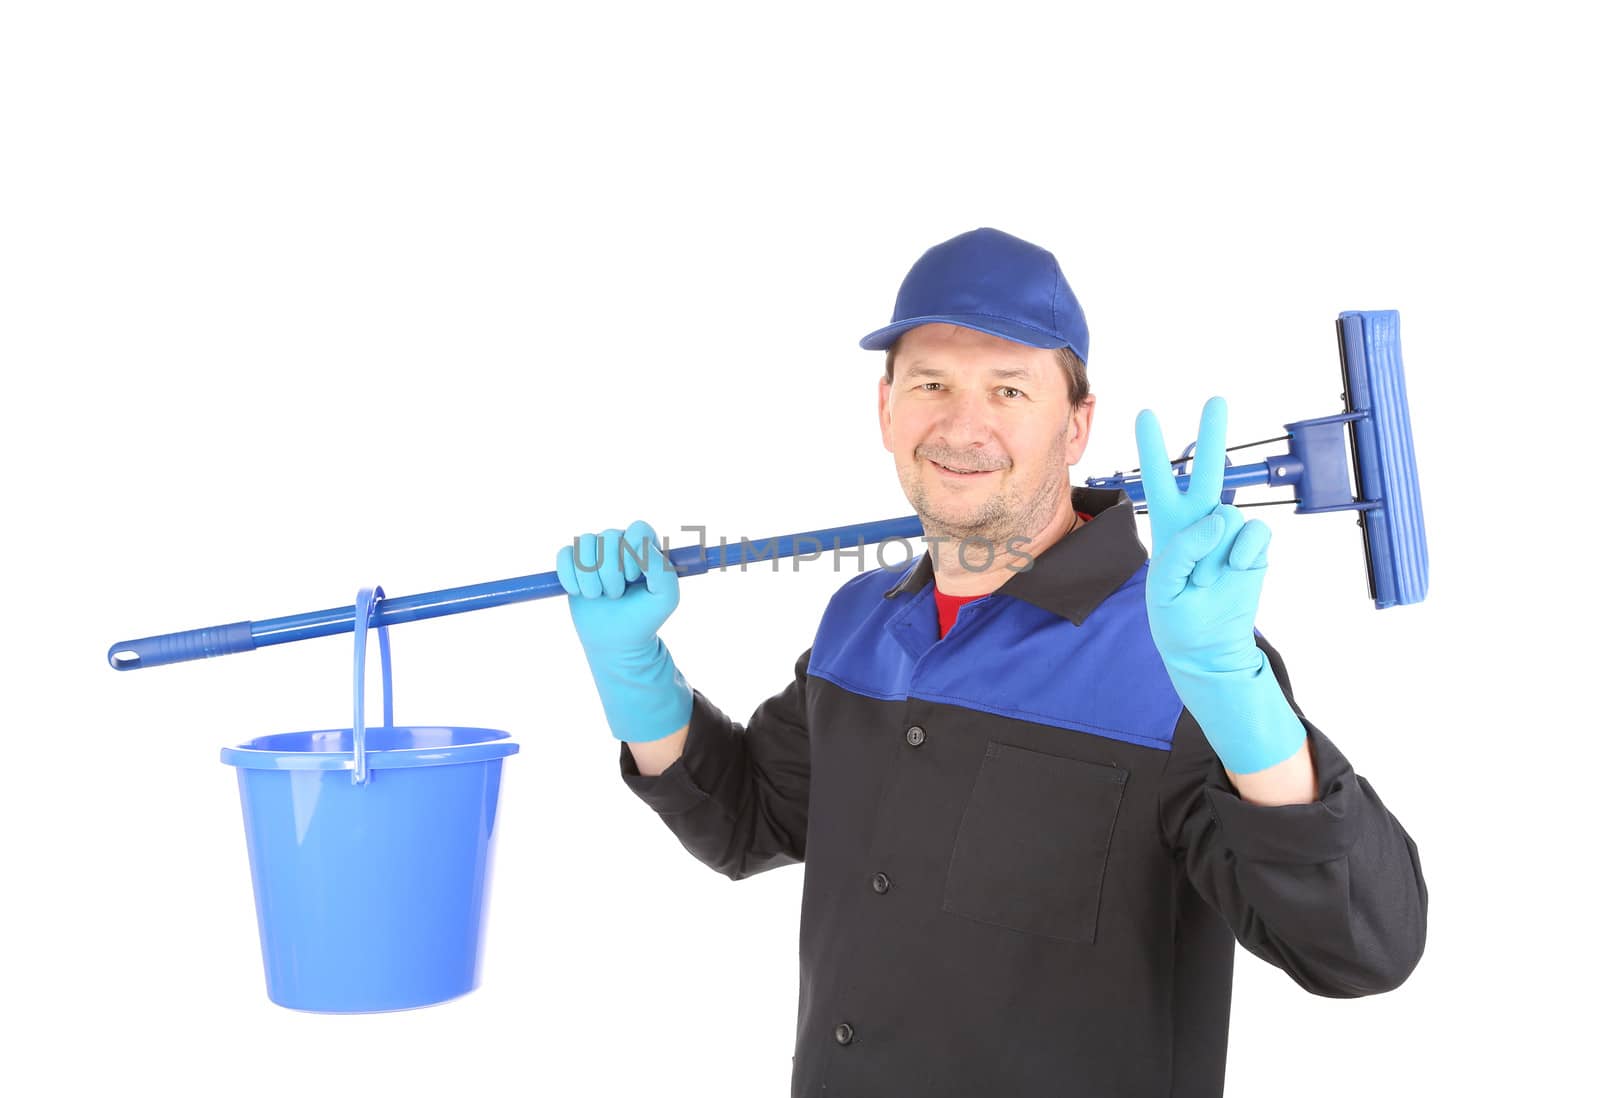 Cleaner with mop and bucket. Isolated on a white background.